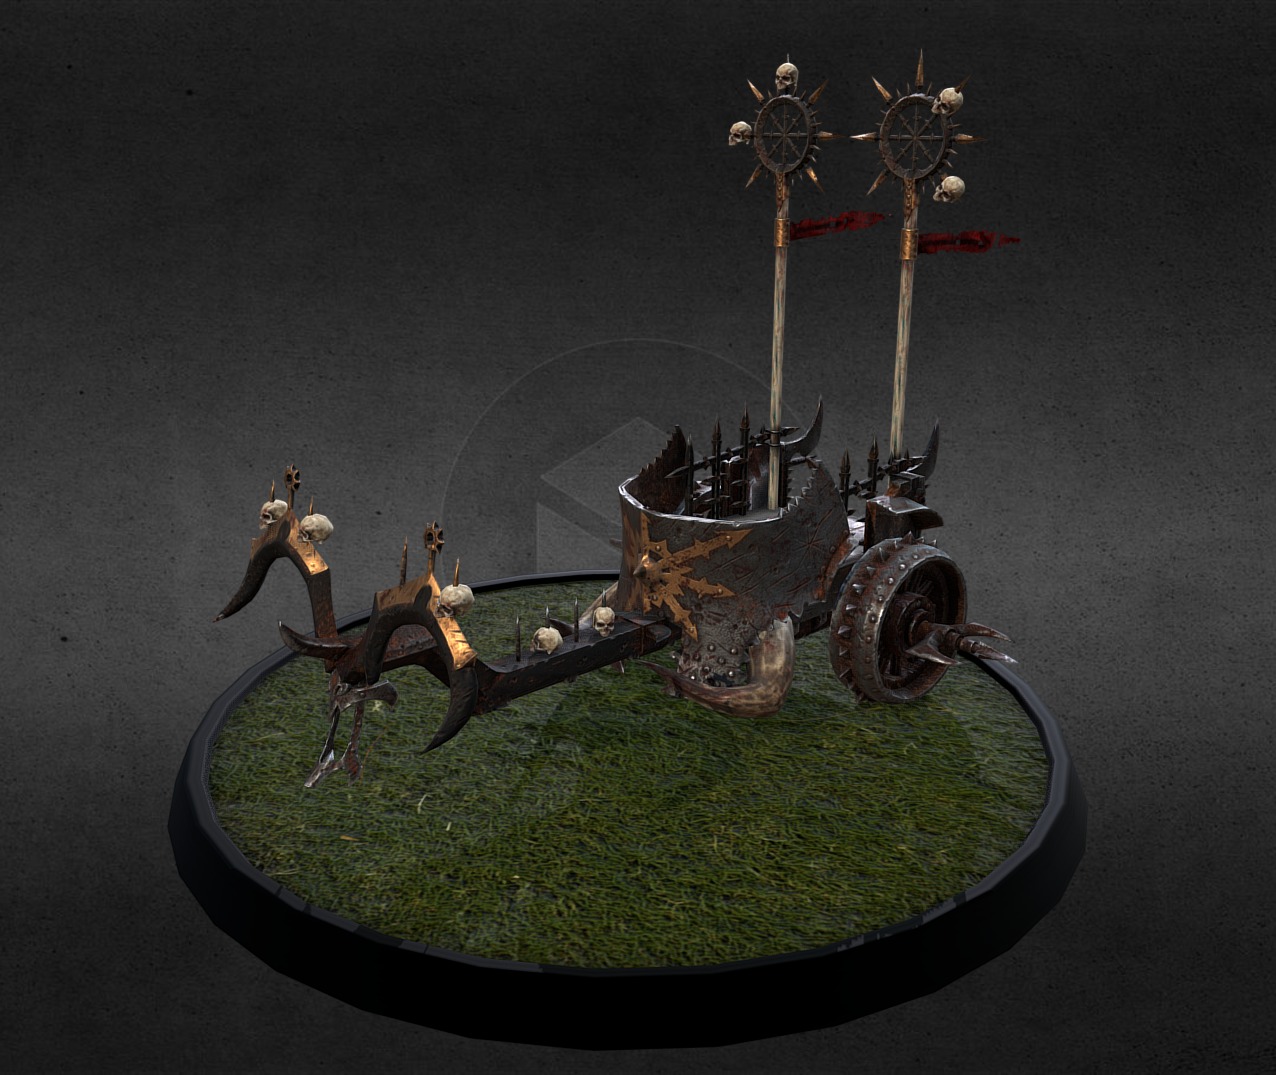 Beastmen Chariot created for Creative Assembly’s Warhammer - Total War game. All assets where created by myself 3d model